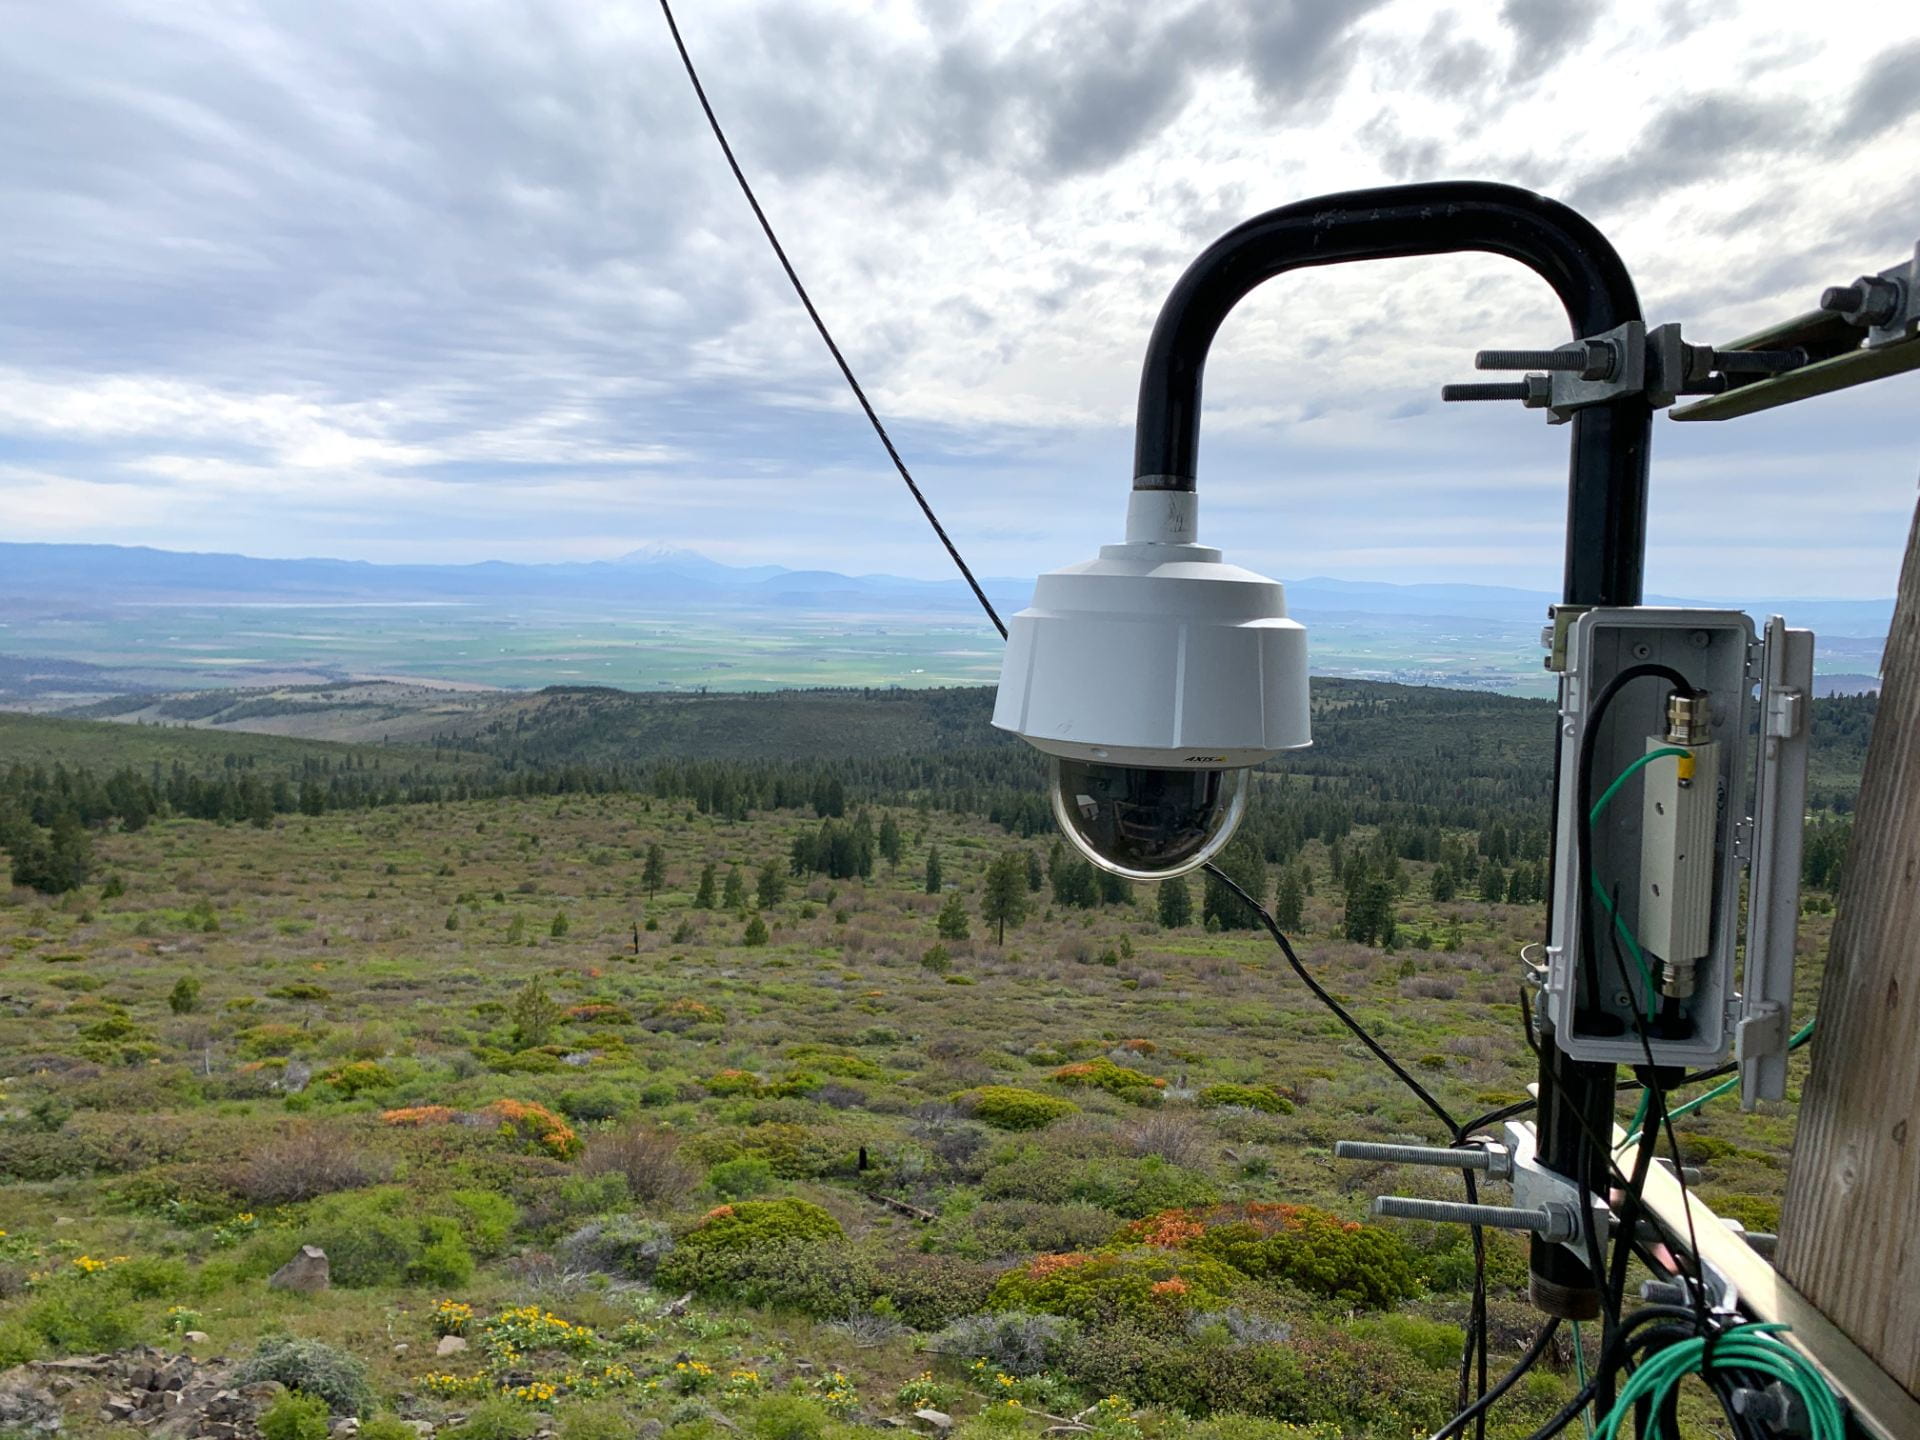 Wildfire detection camera on fire lookout tower has views of valley